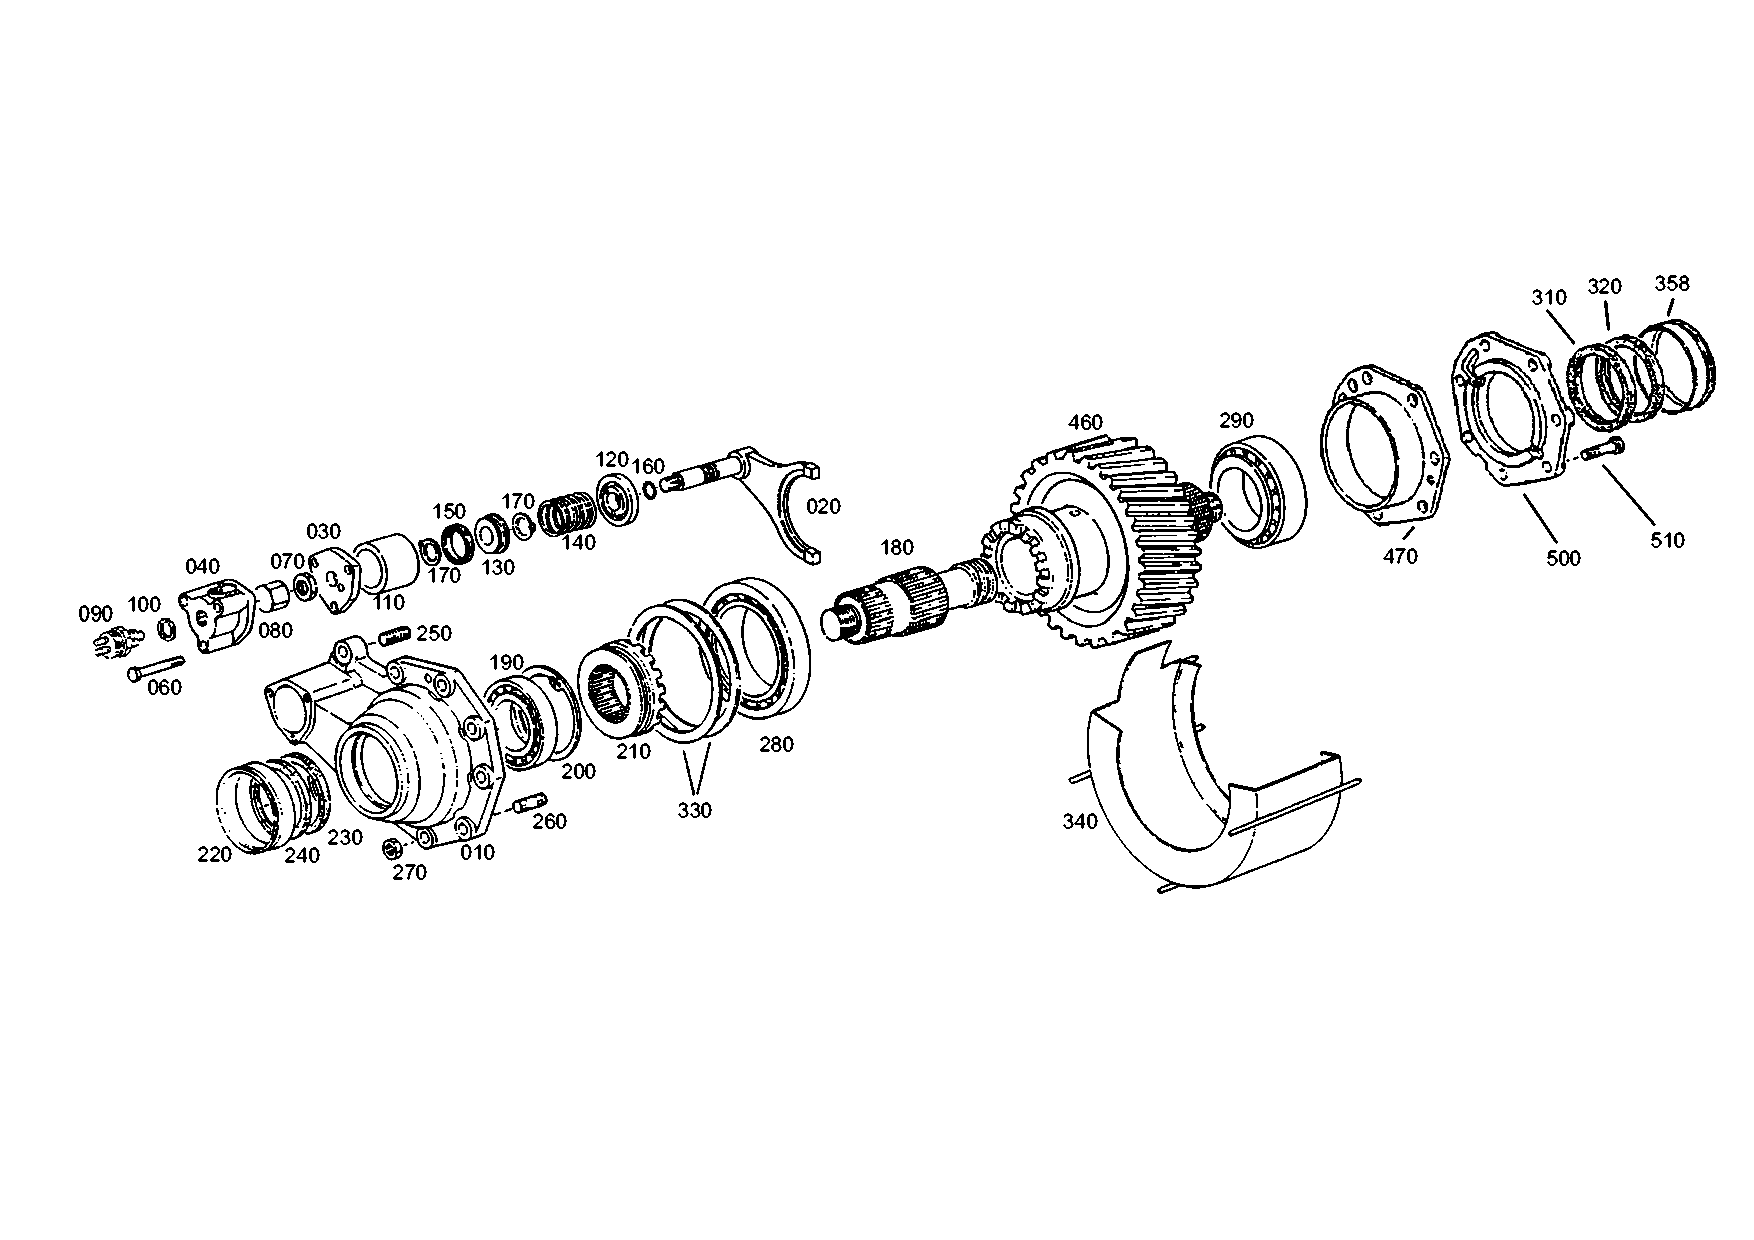 drawing for LUNA EQUIPOS INDUSTRIEALES, S.A. 199118250127 - GEAR SHIFT FORK (figure 4)